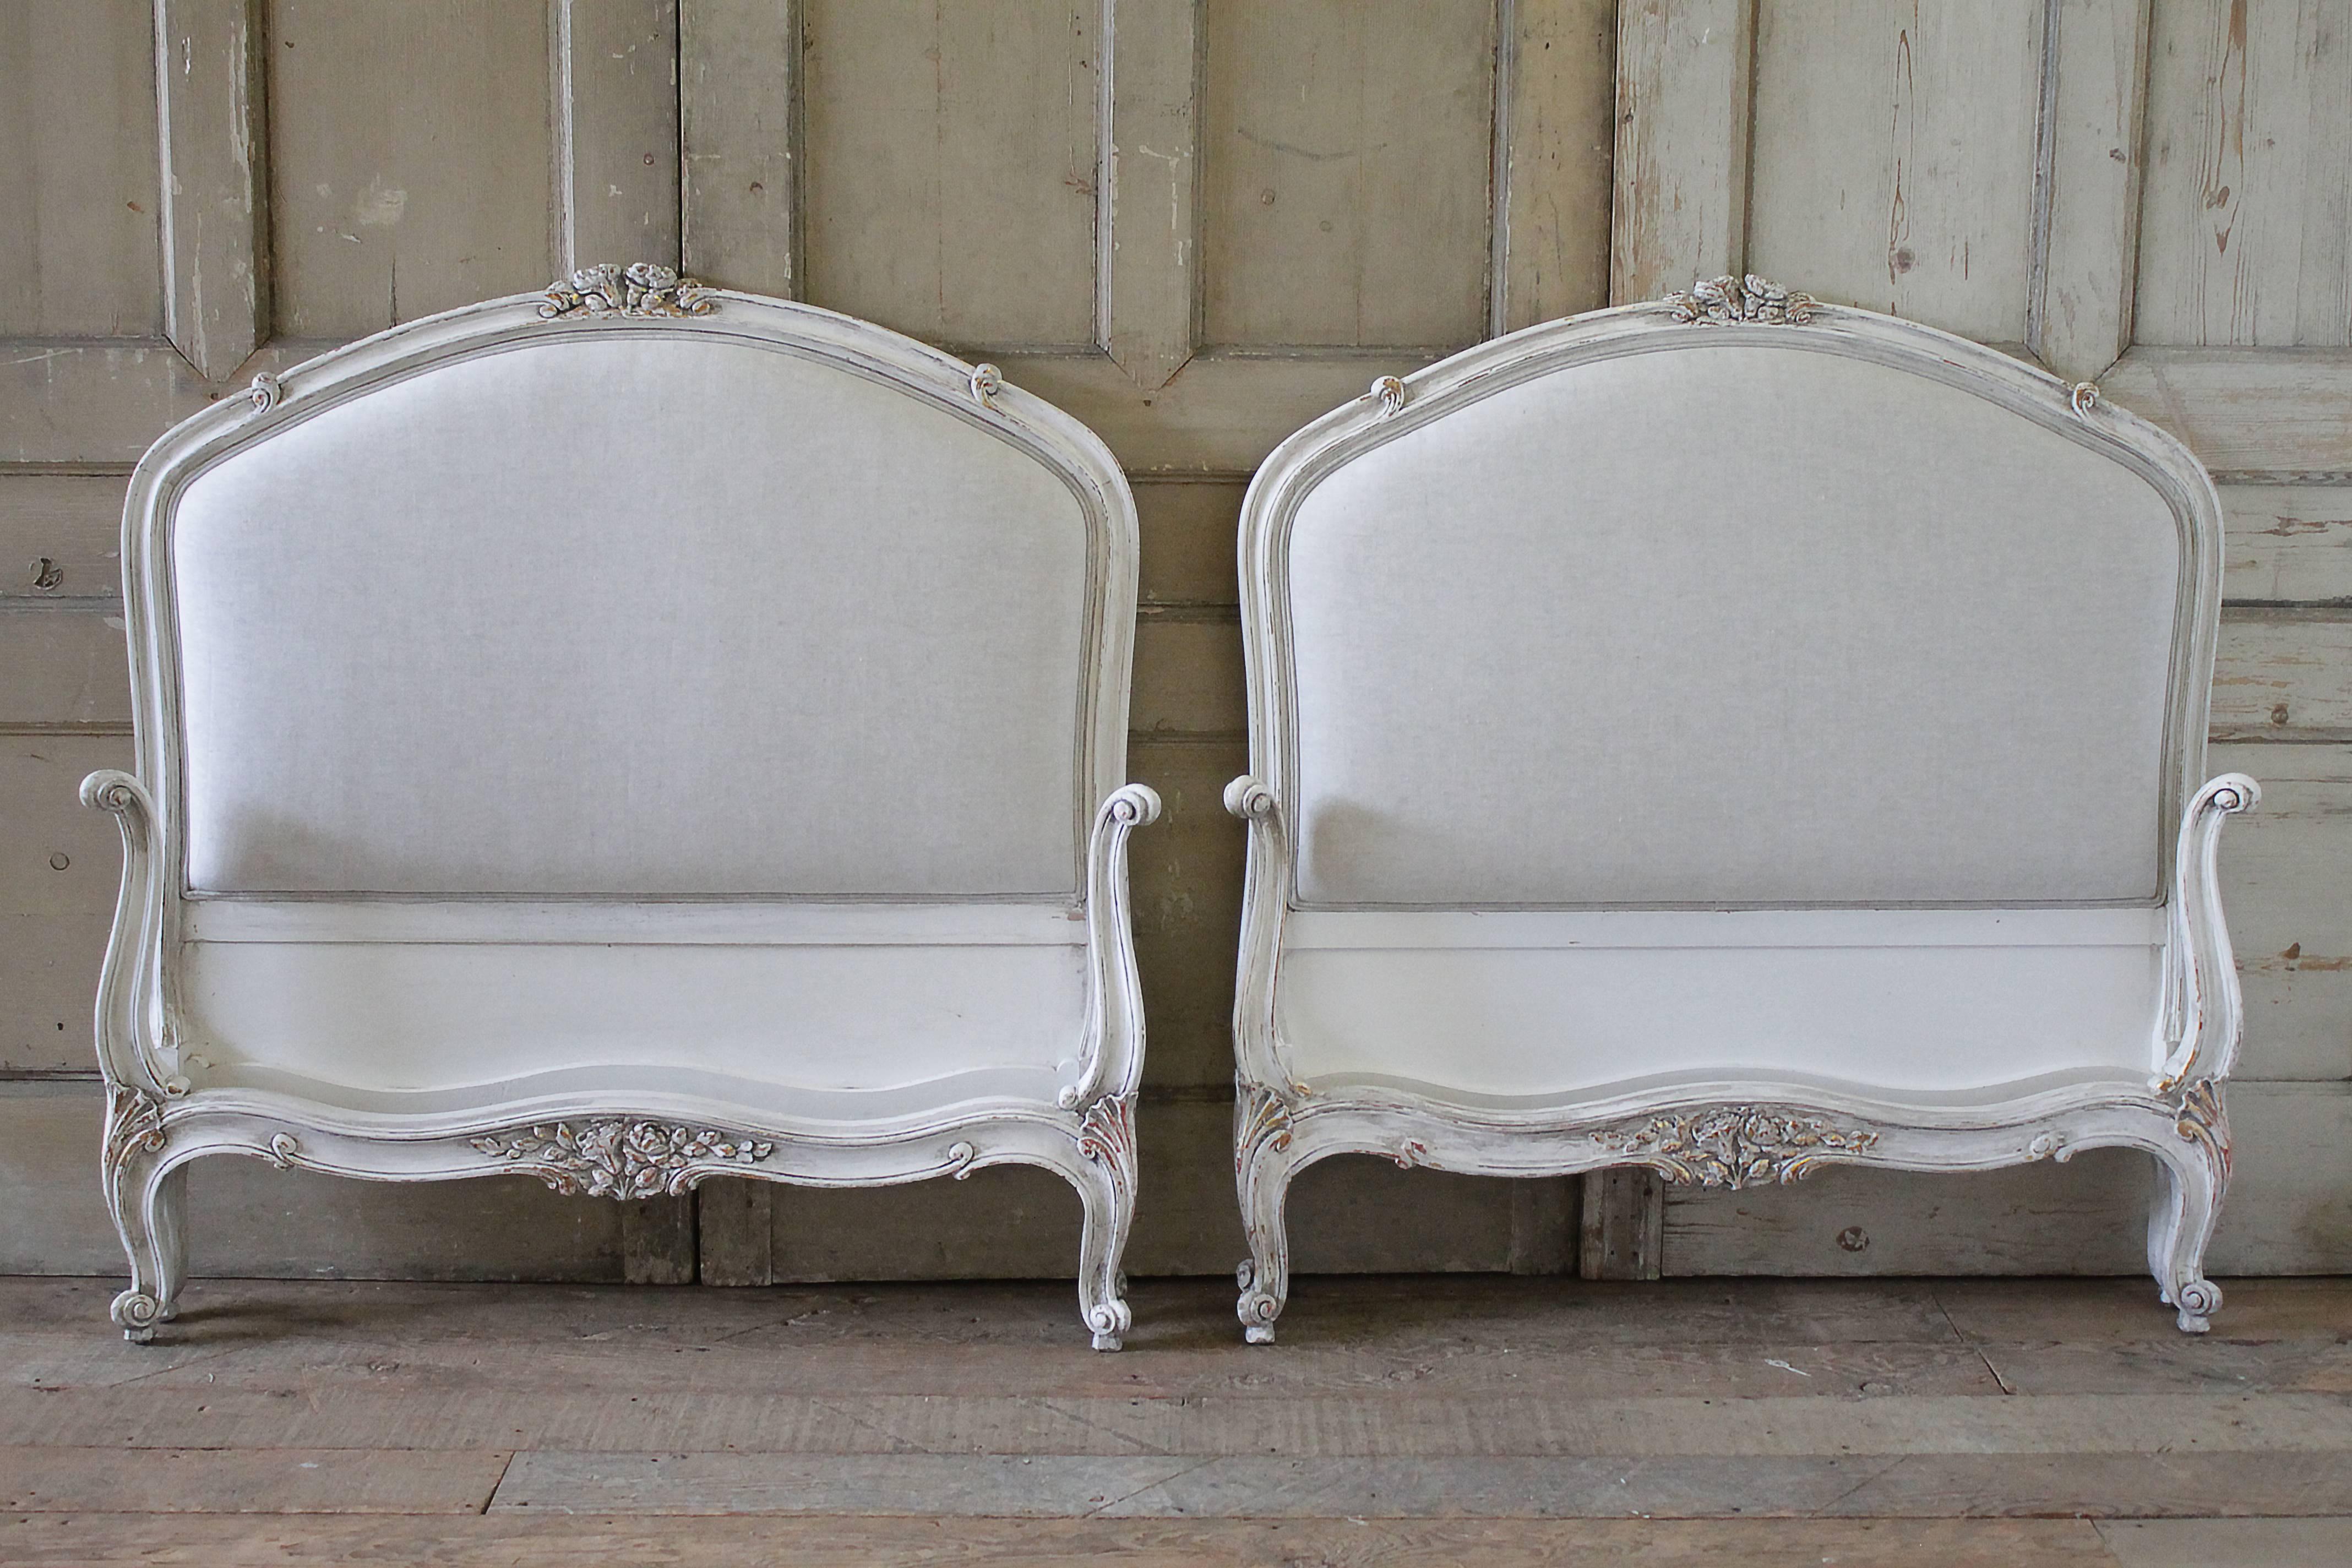 Lovely pair of painted and upholstered Twin size French beds.
These can be used with a standard US Twin mattress.
We have painted these in our antique oyster white finish, it is a soft white with subtle grey tones. Original gilt highlights are